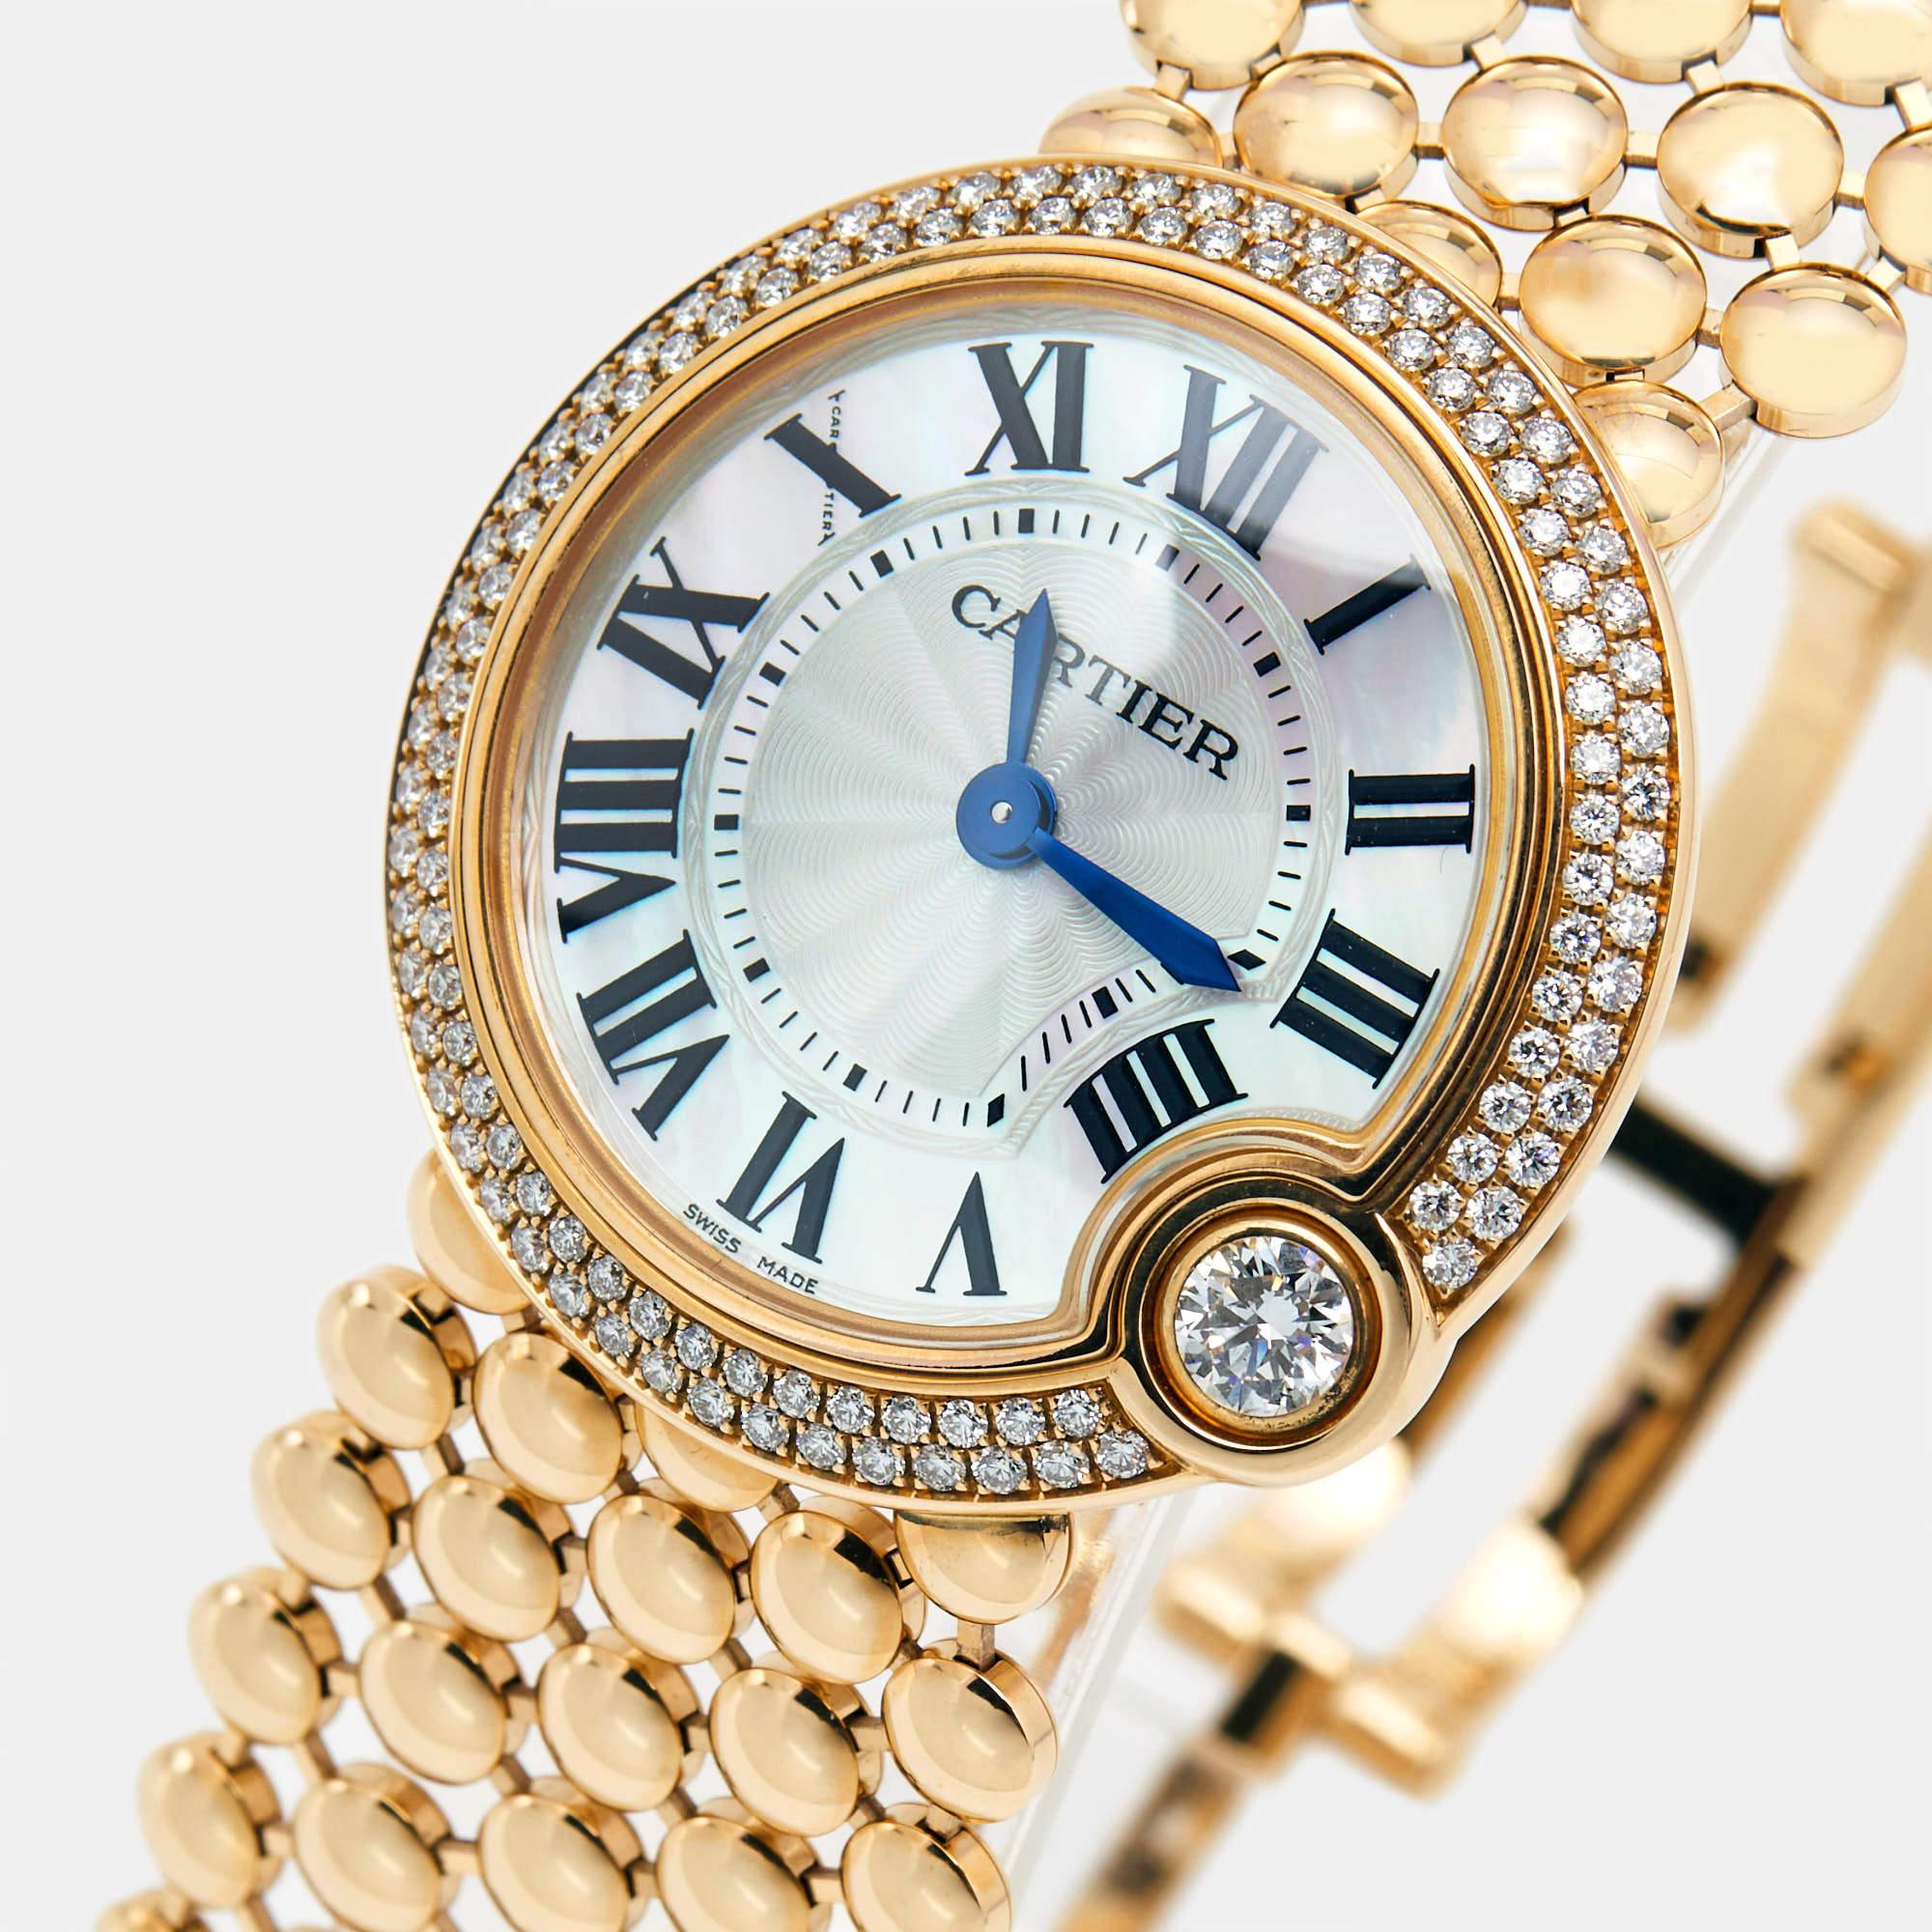 Dazzle the eyes that fall on you when you flaunt this Ballon Blanc de Cartier timepiece from Cartier on your wrist. Swiss-made, it has been exquisitely crafted from 18k rose gold and detailed with a gorgeous crown. The watch features Roman numeral